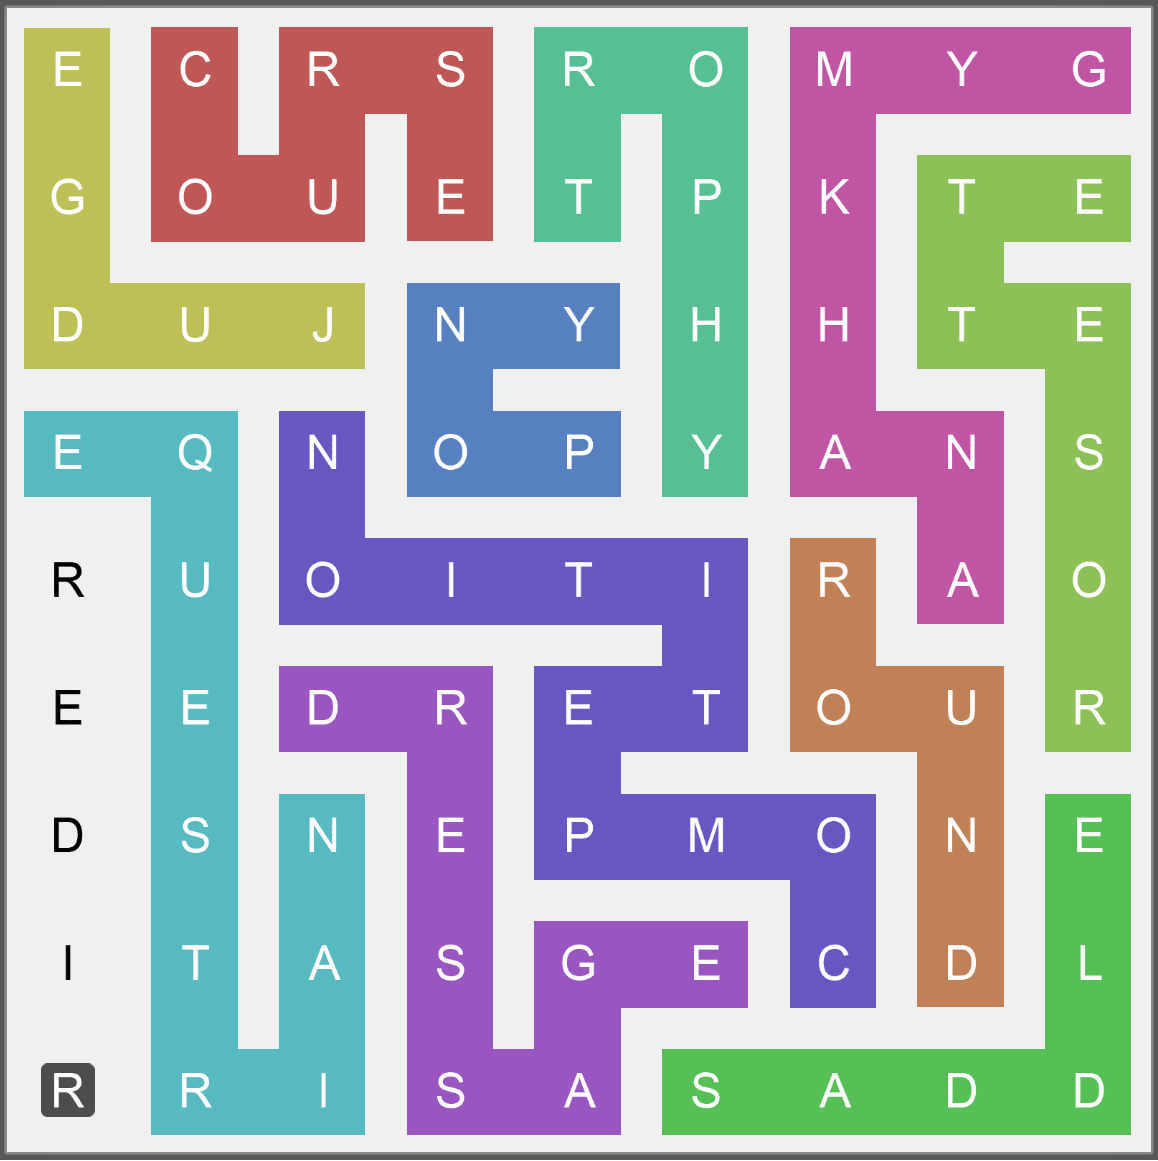 Puzzle Page Word #39 s Snake Septemeber 25 2019 Answers PuzzlePageAnswers net